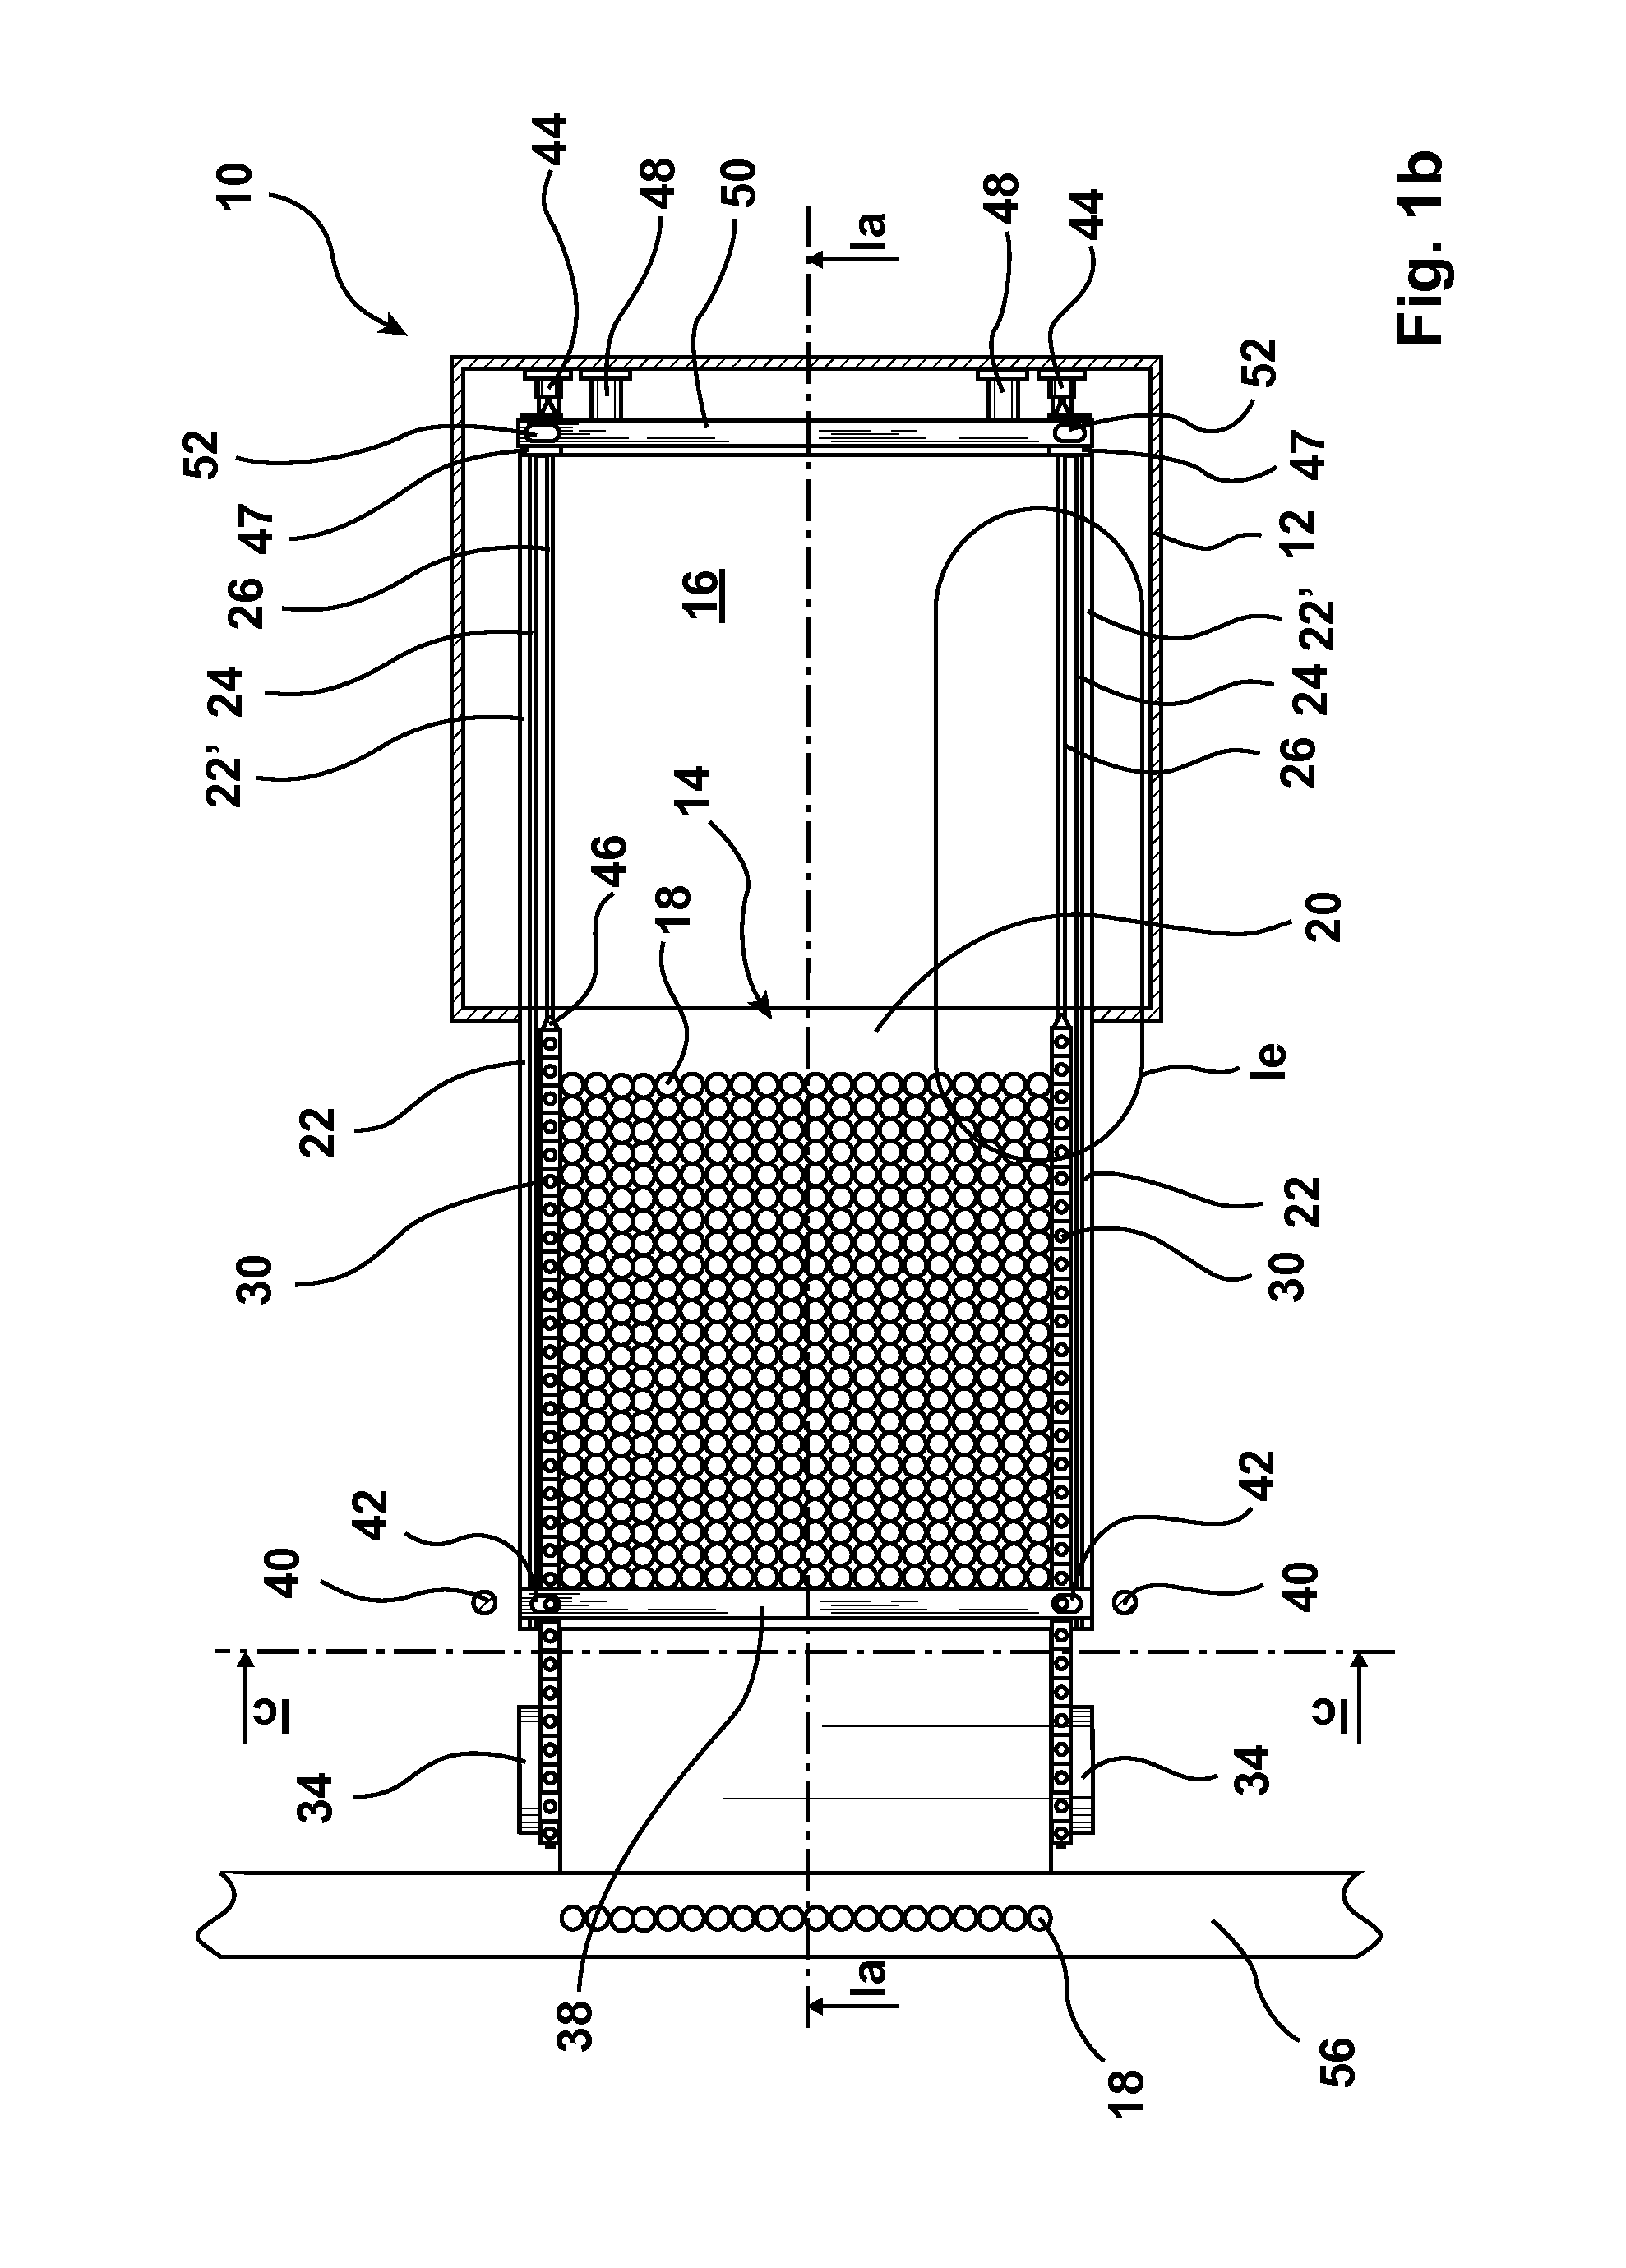 Apparatus for loading and unloading a tray of a freeze drying plant and method thereof